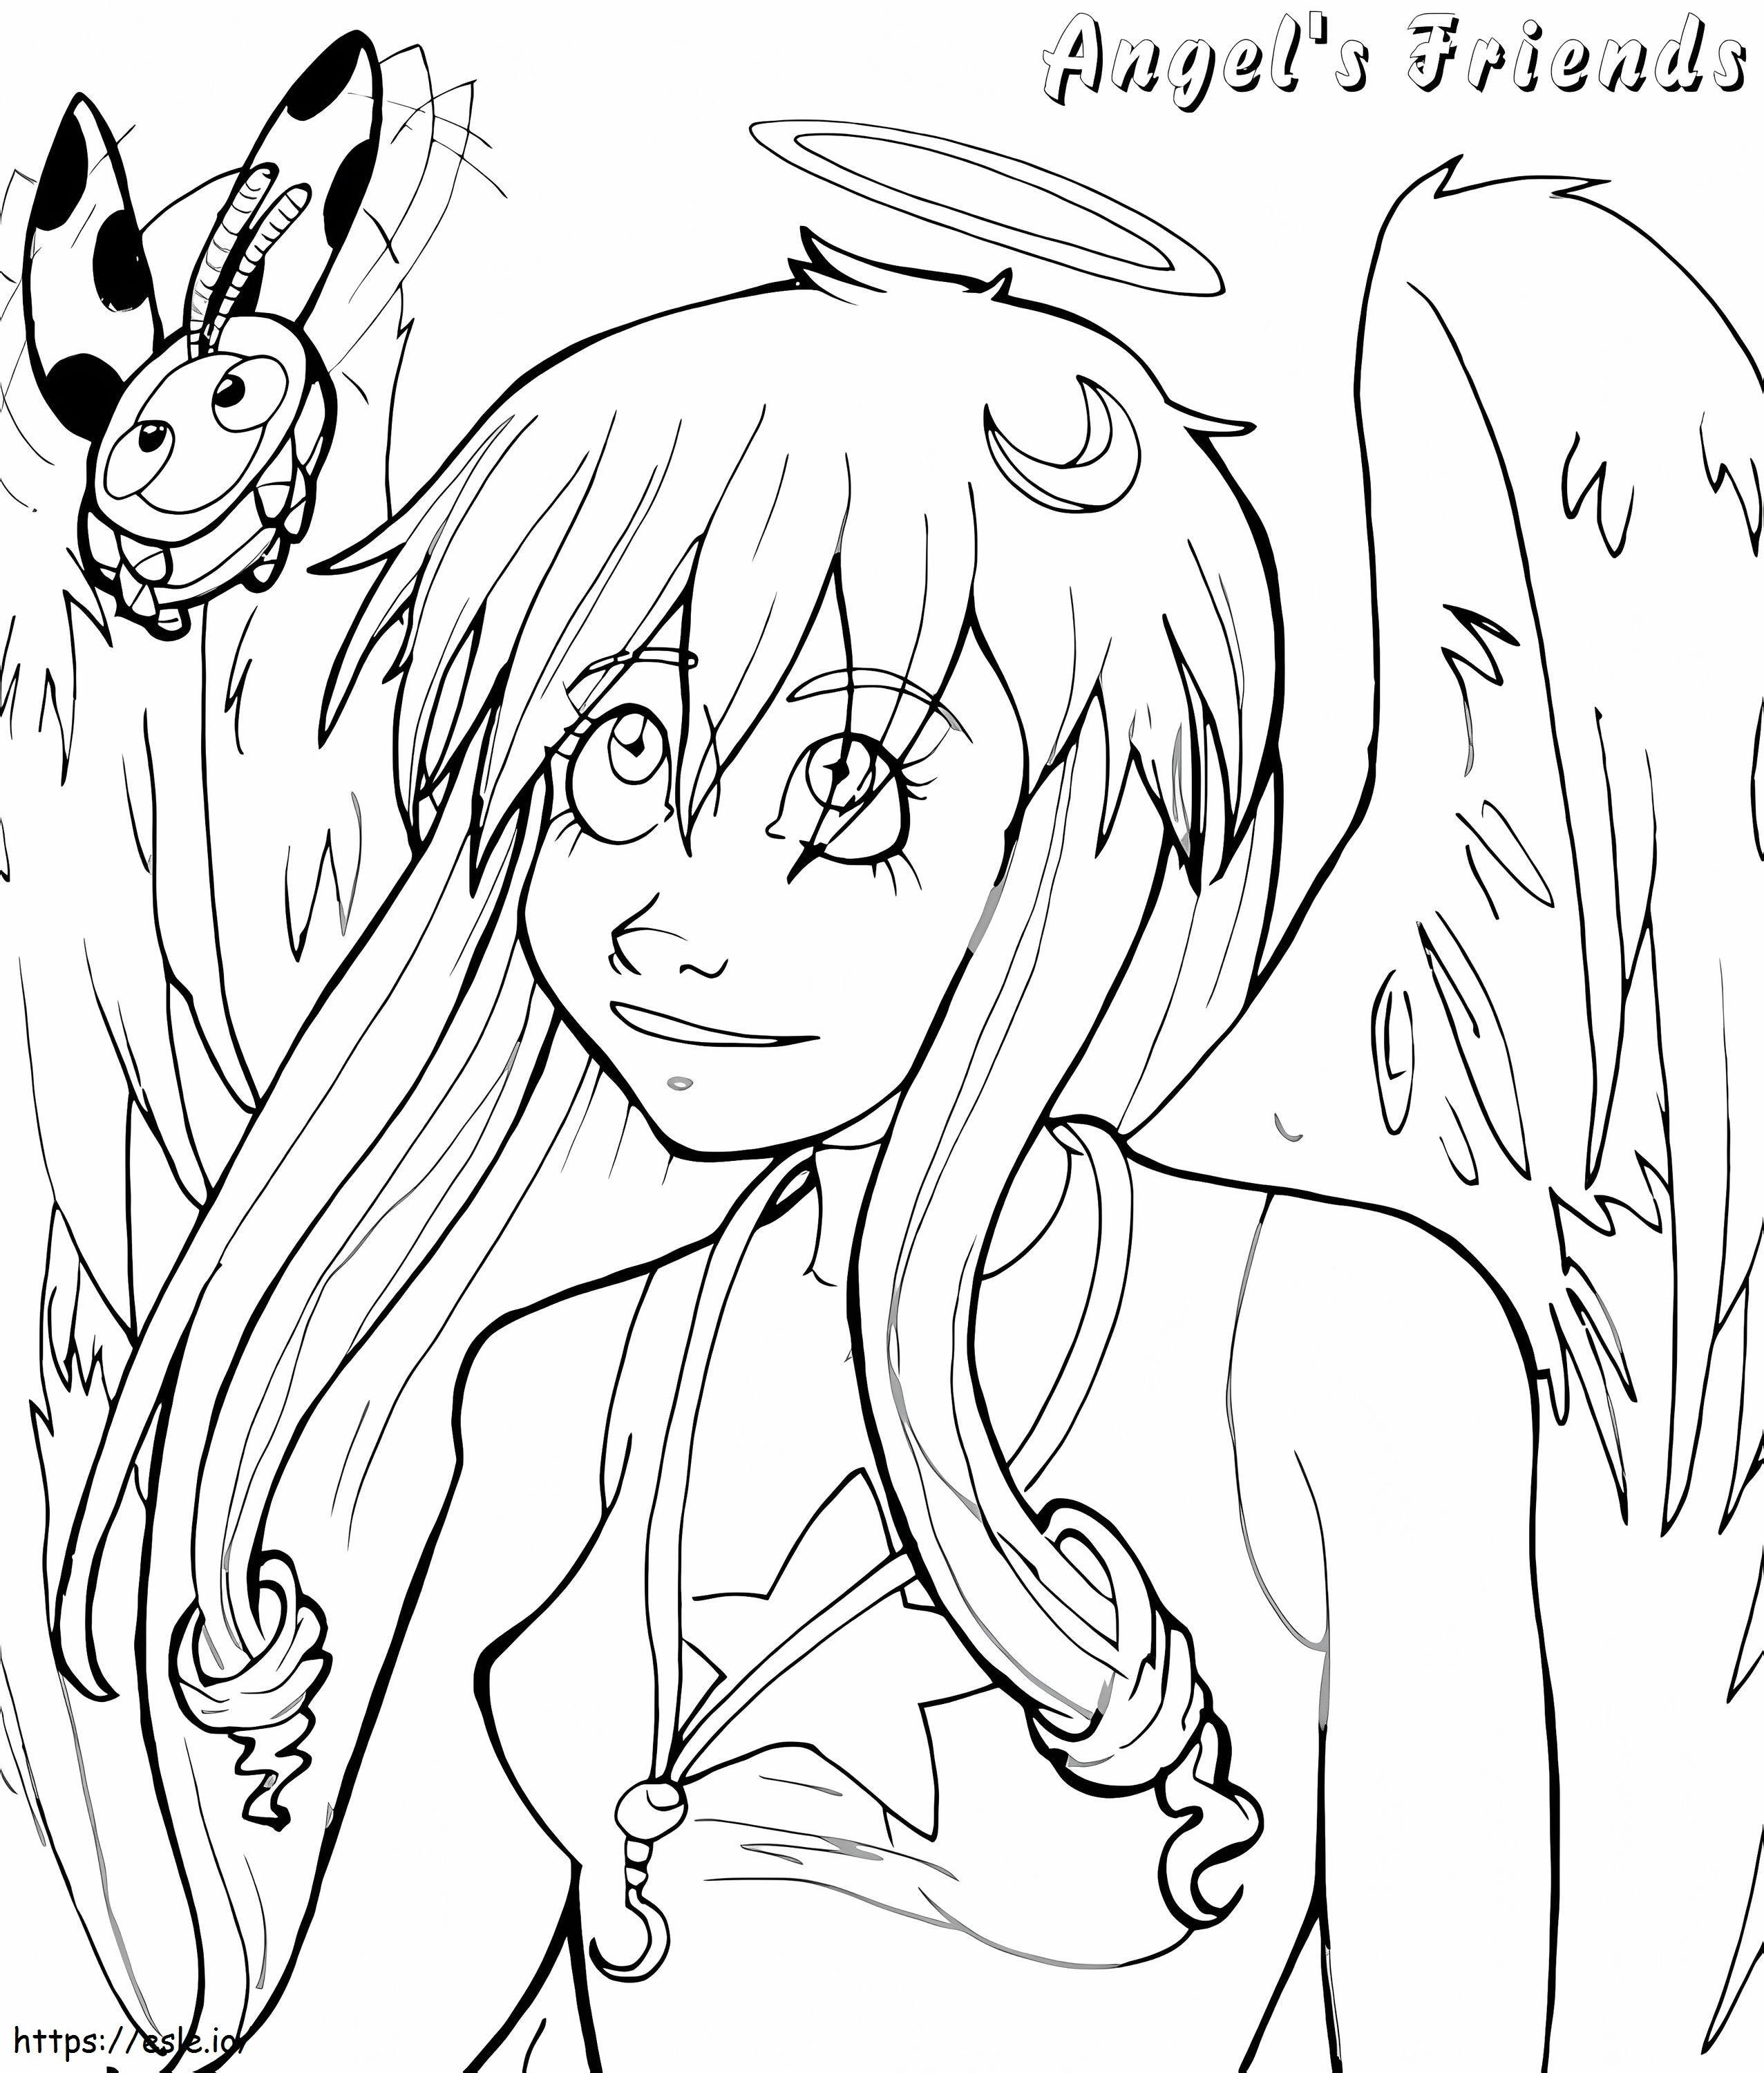 Angels Friends 7 coloring page